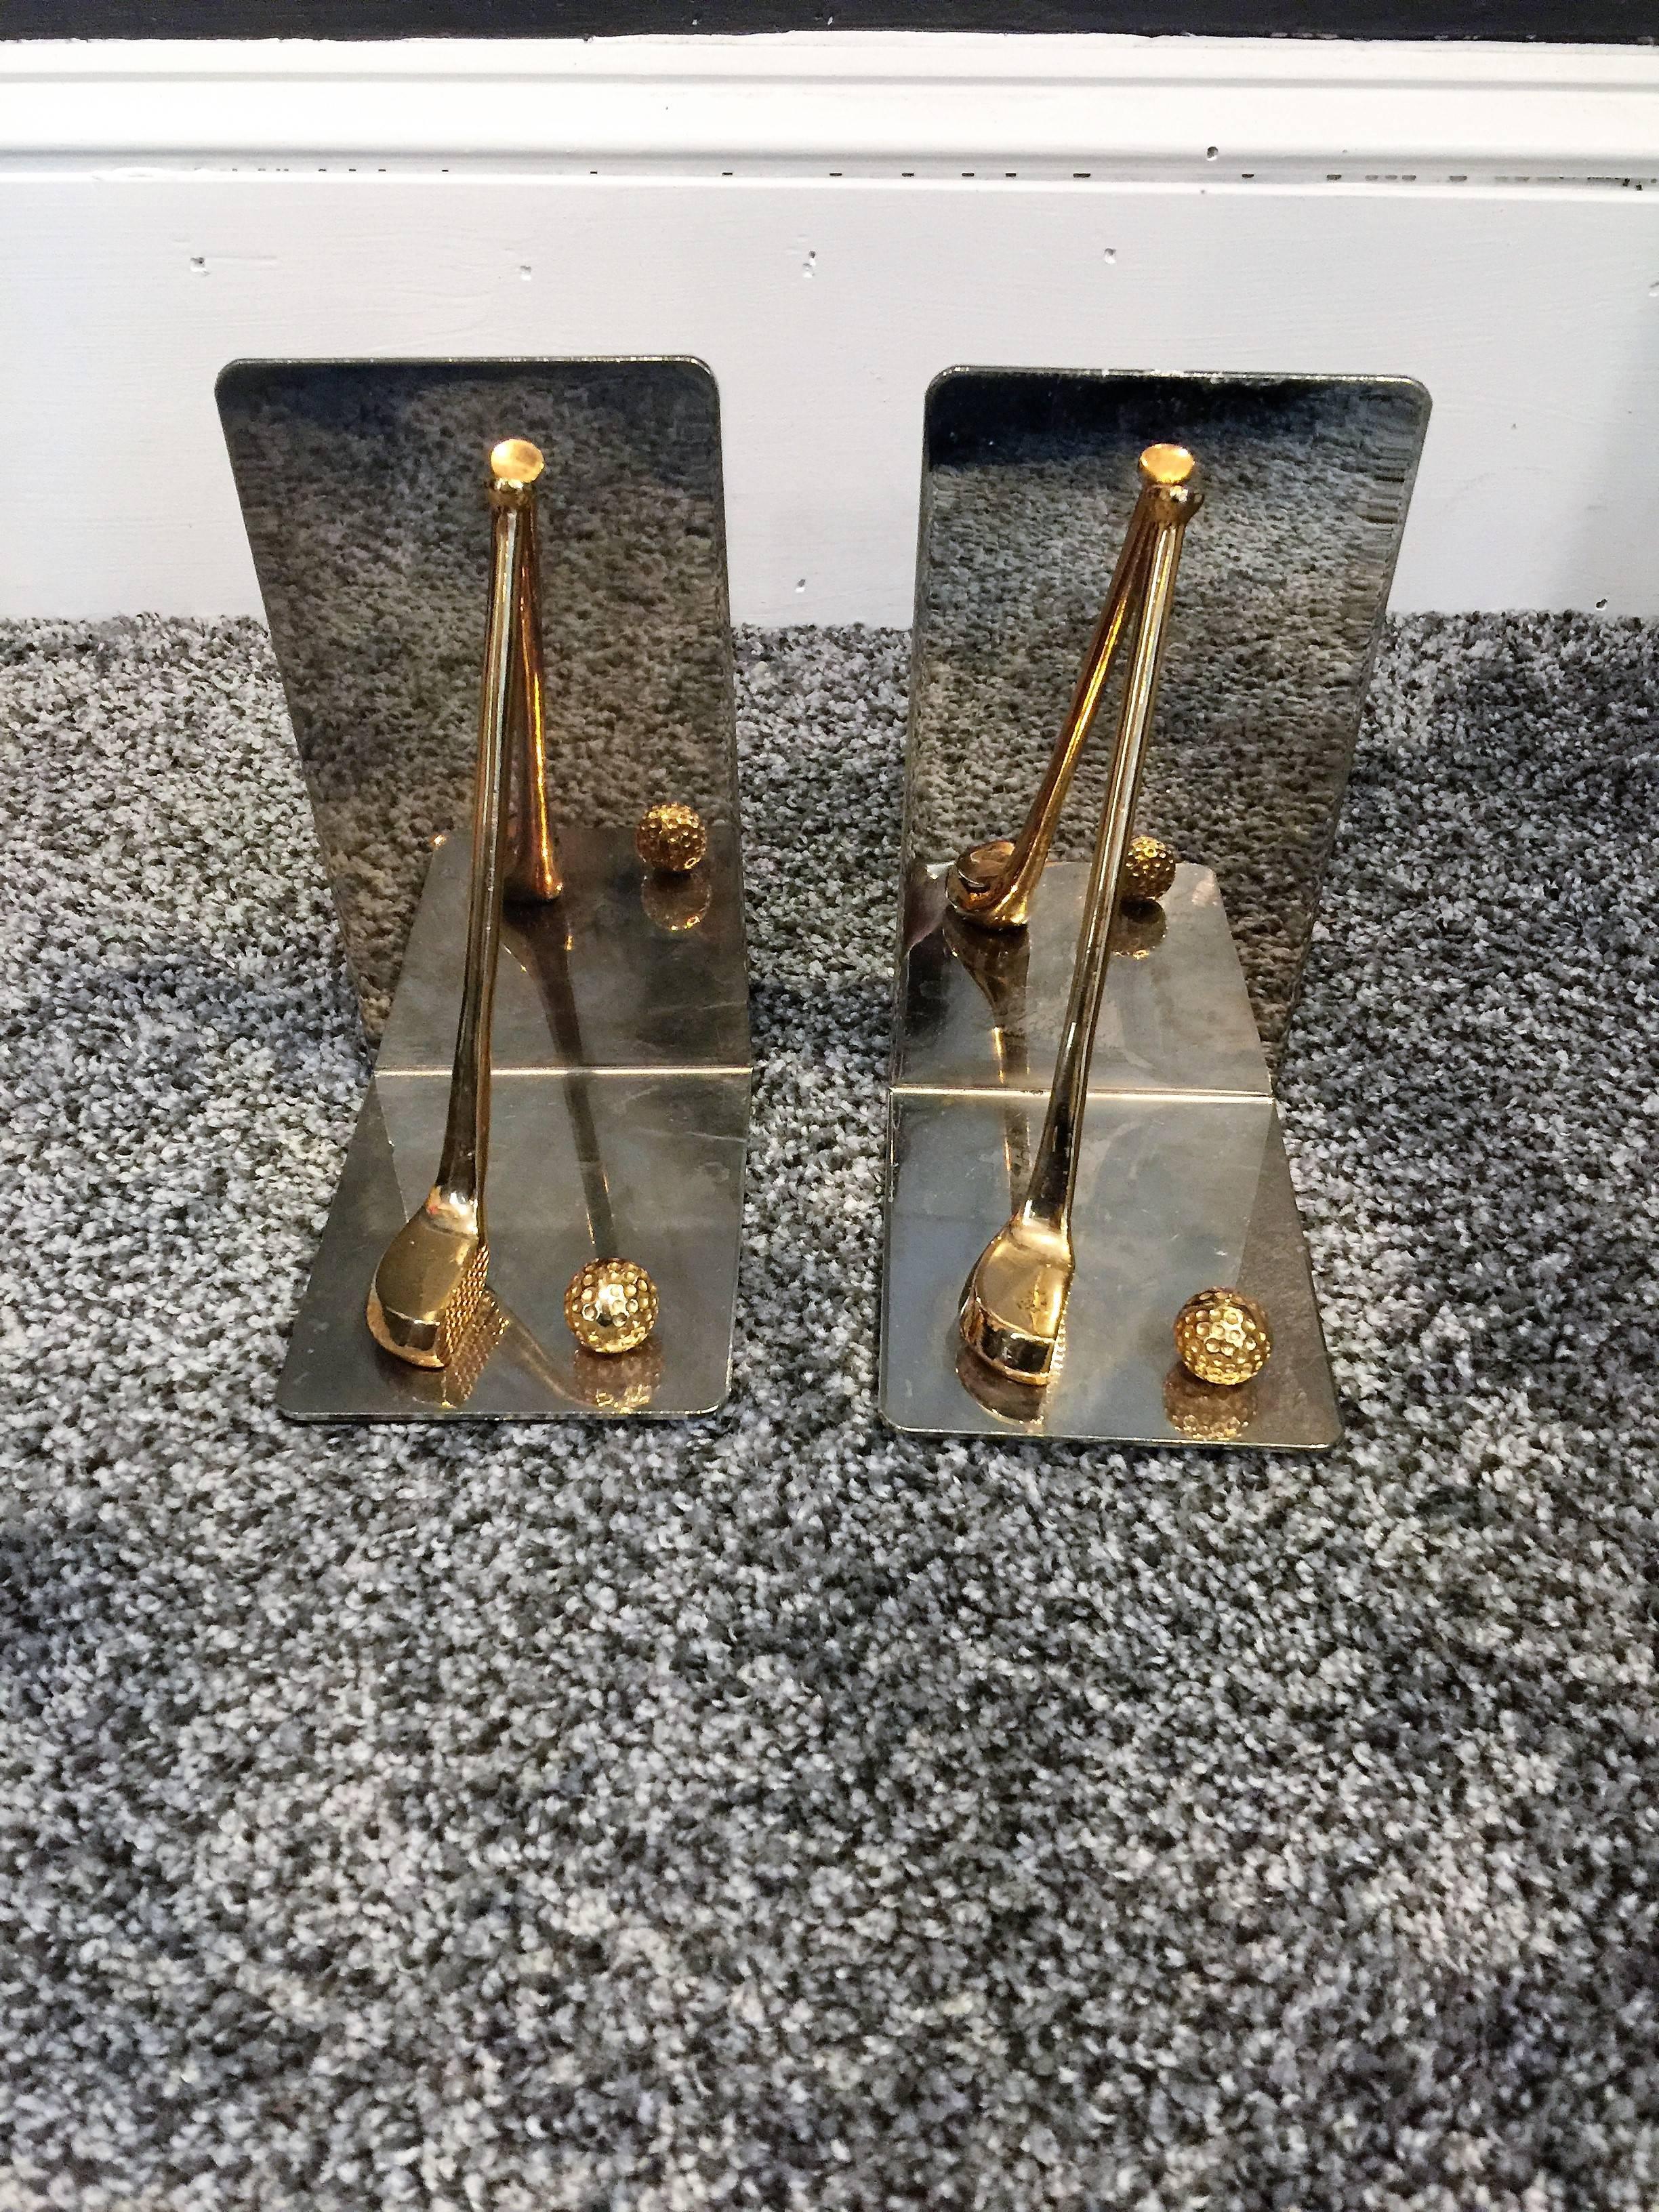 Striking pair of polished nickelled steel and cast brass ball and club bookends well designed and made in the style of Gucci.